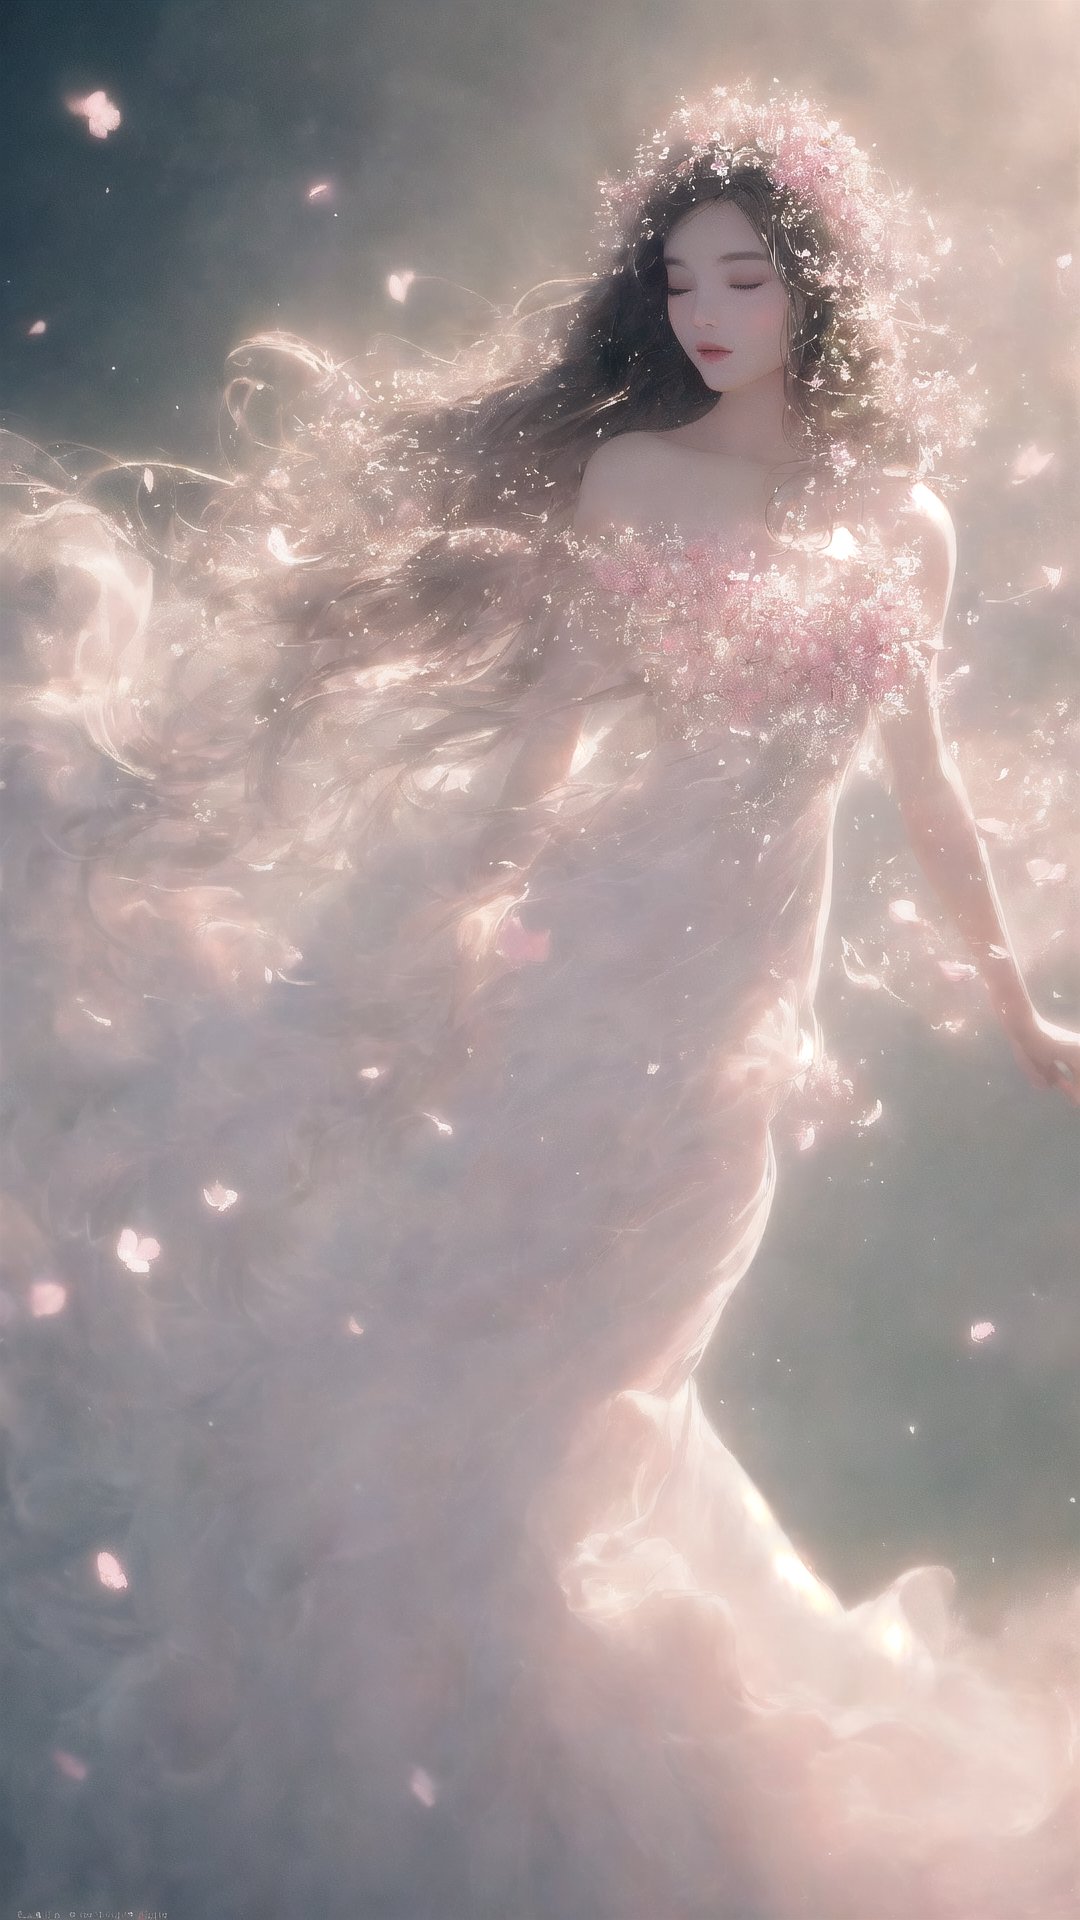 In a dreamy and ethereal setting, the woman is depicted floating in a cloud of mist and soft light. Her body is surrounded by delicate flowers that seem to bloom from her very essence, symbolizing the beauty and vitality of femininity. The colors used are pastel and muted, creating a serene and tranquil atmosphere. The composition is organic and flowing, with the woman’s body forming graceful curves that harmonize with the natural elements around her. The overall mood is one of enchantment and mystique, evoking a sense of wonder and reverence for the feminine form,ViNtAgE